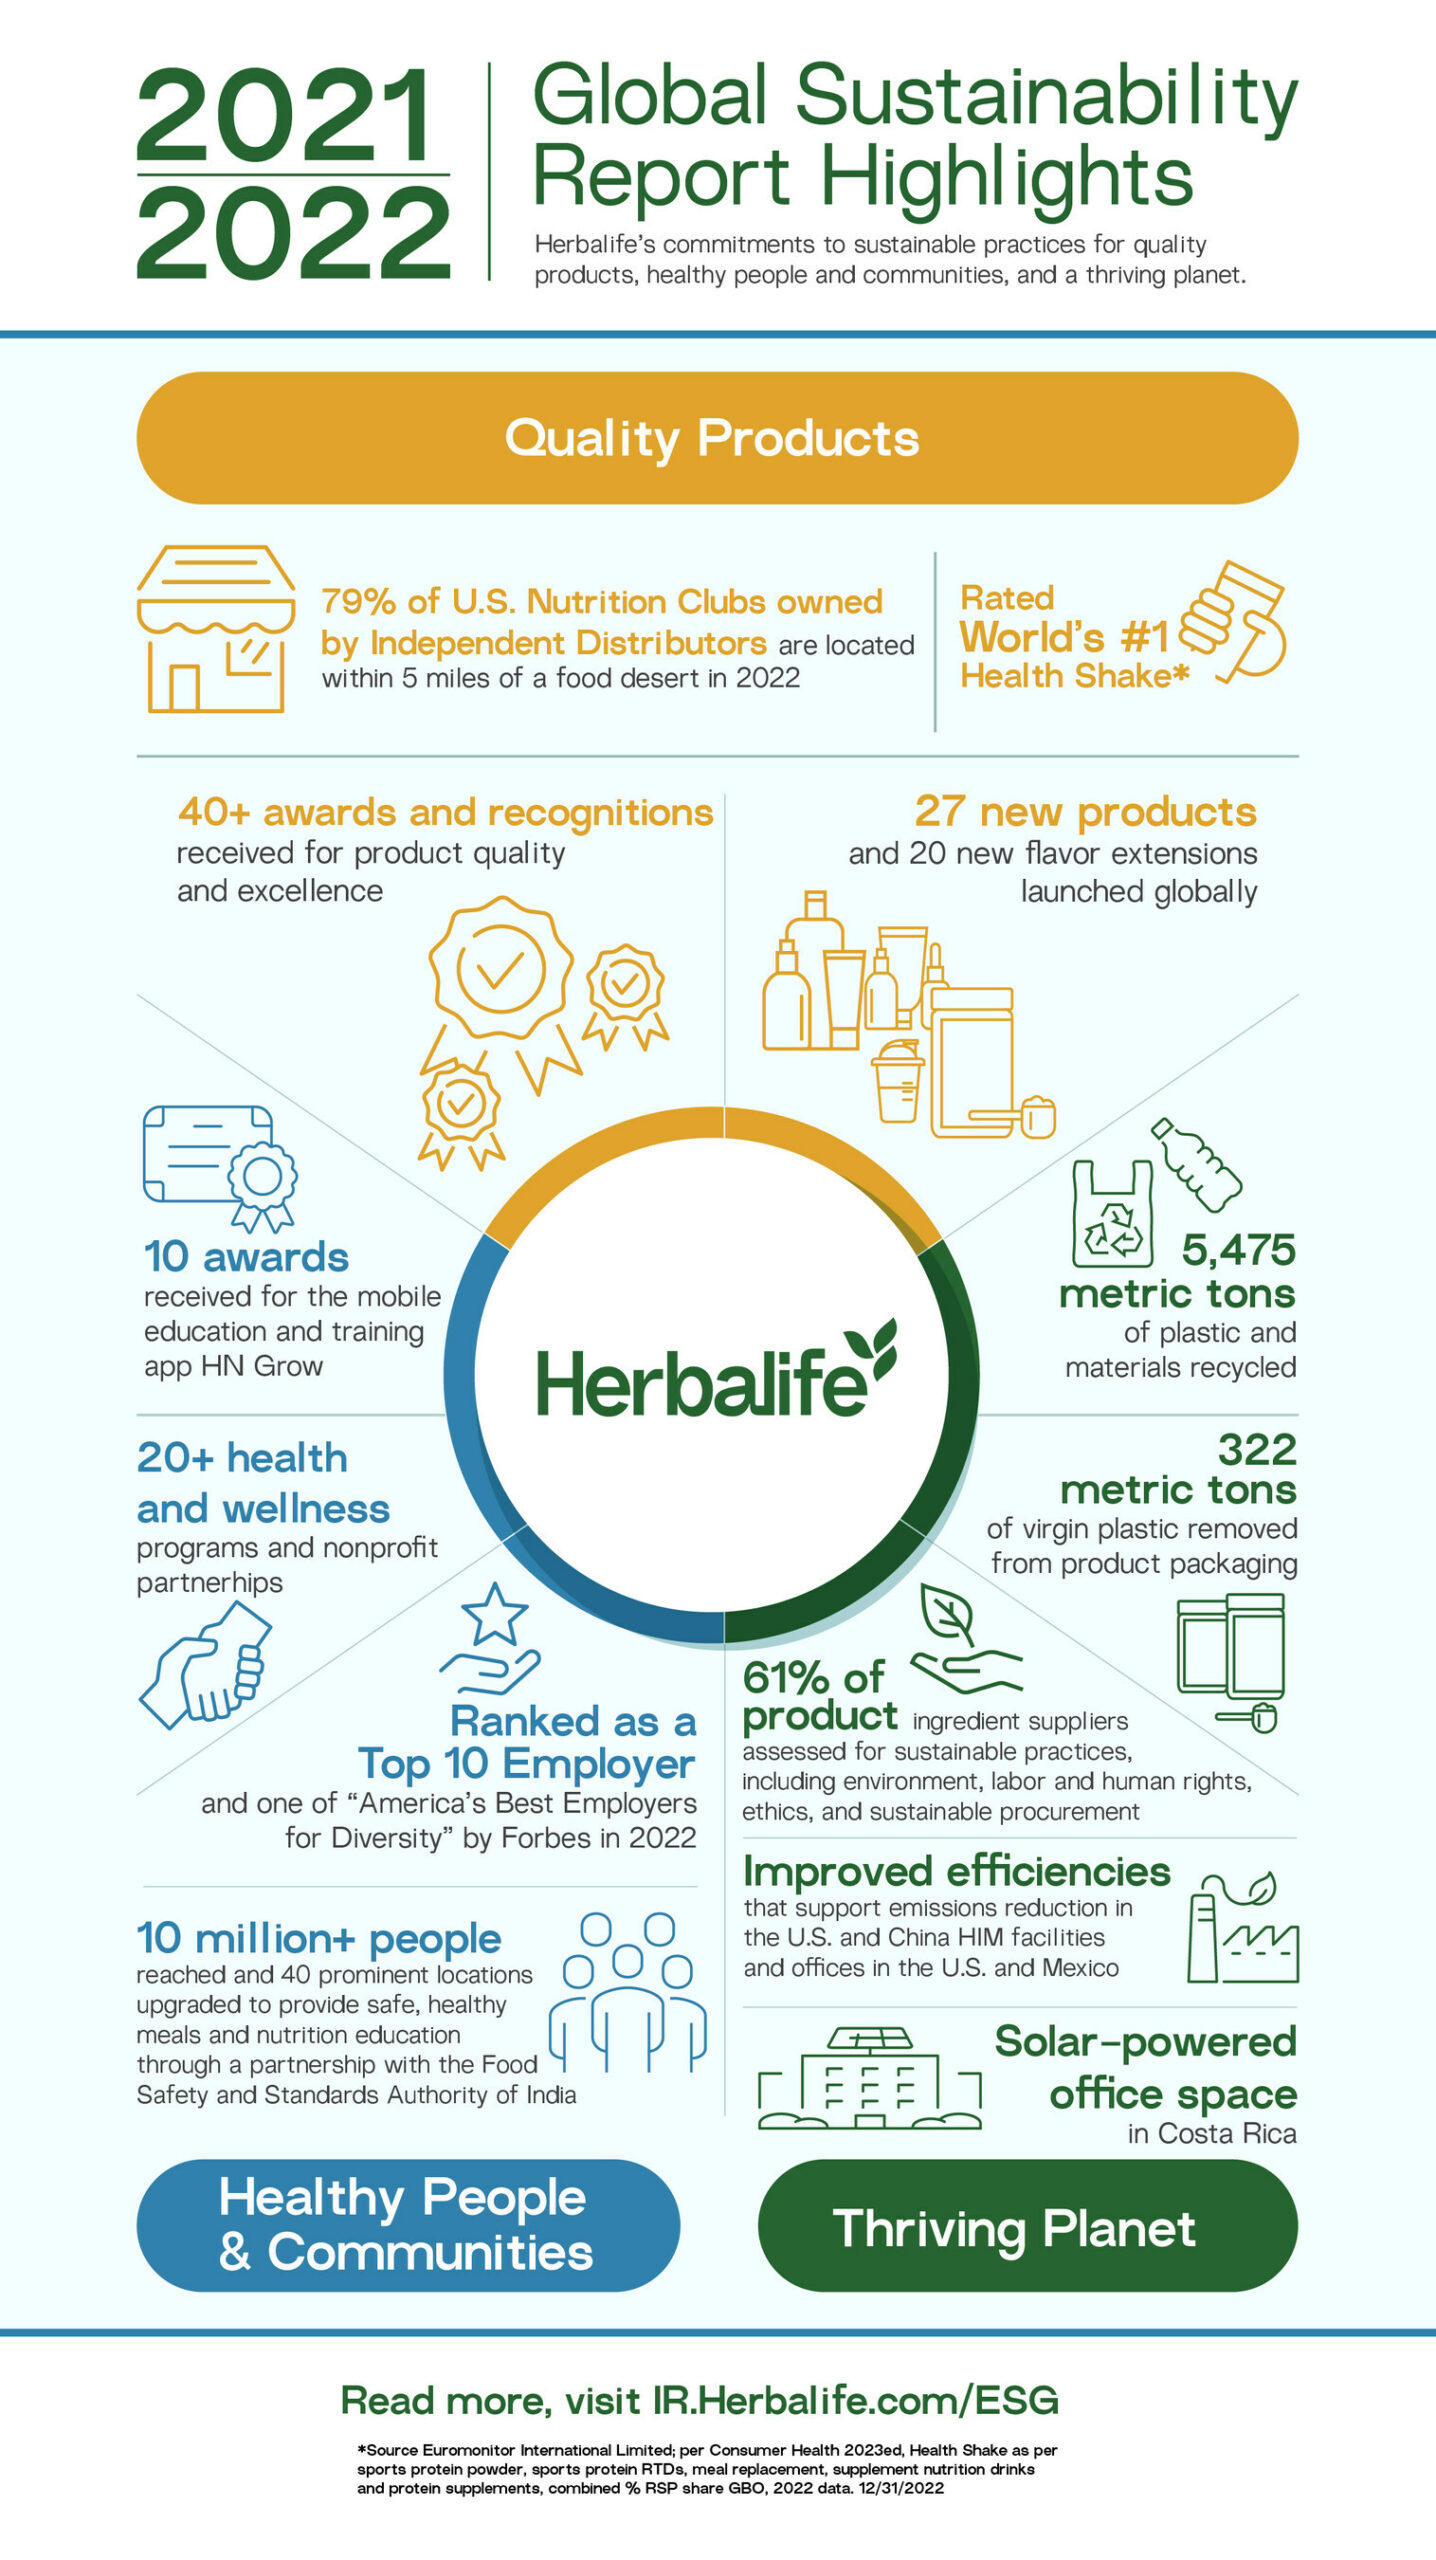 Herbalife Releases Second Global Sustainability Report